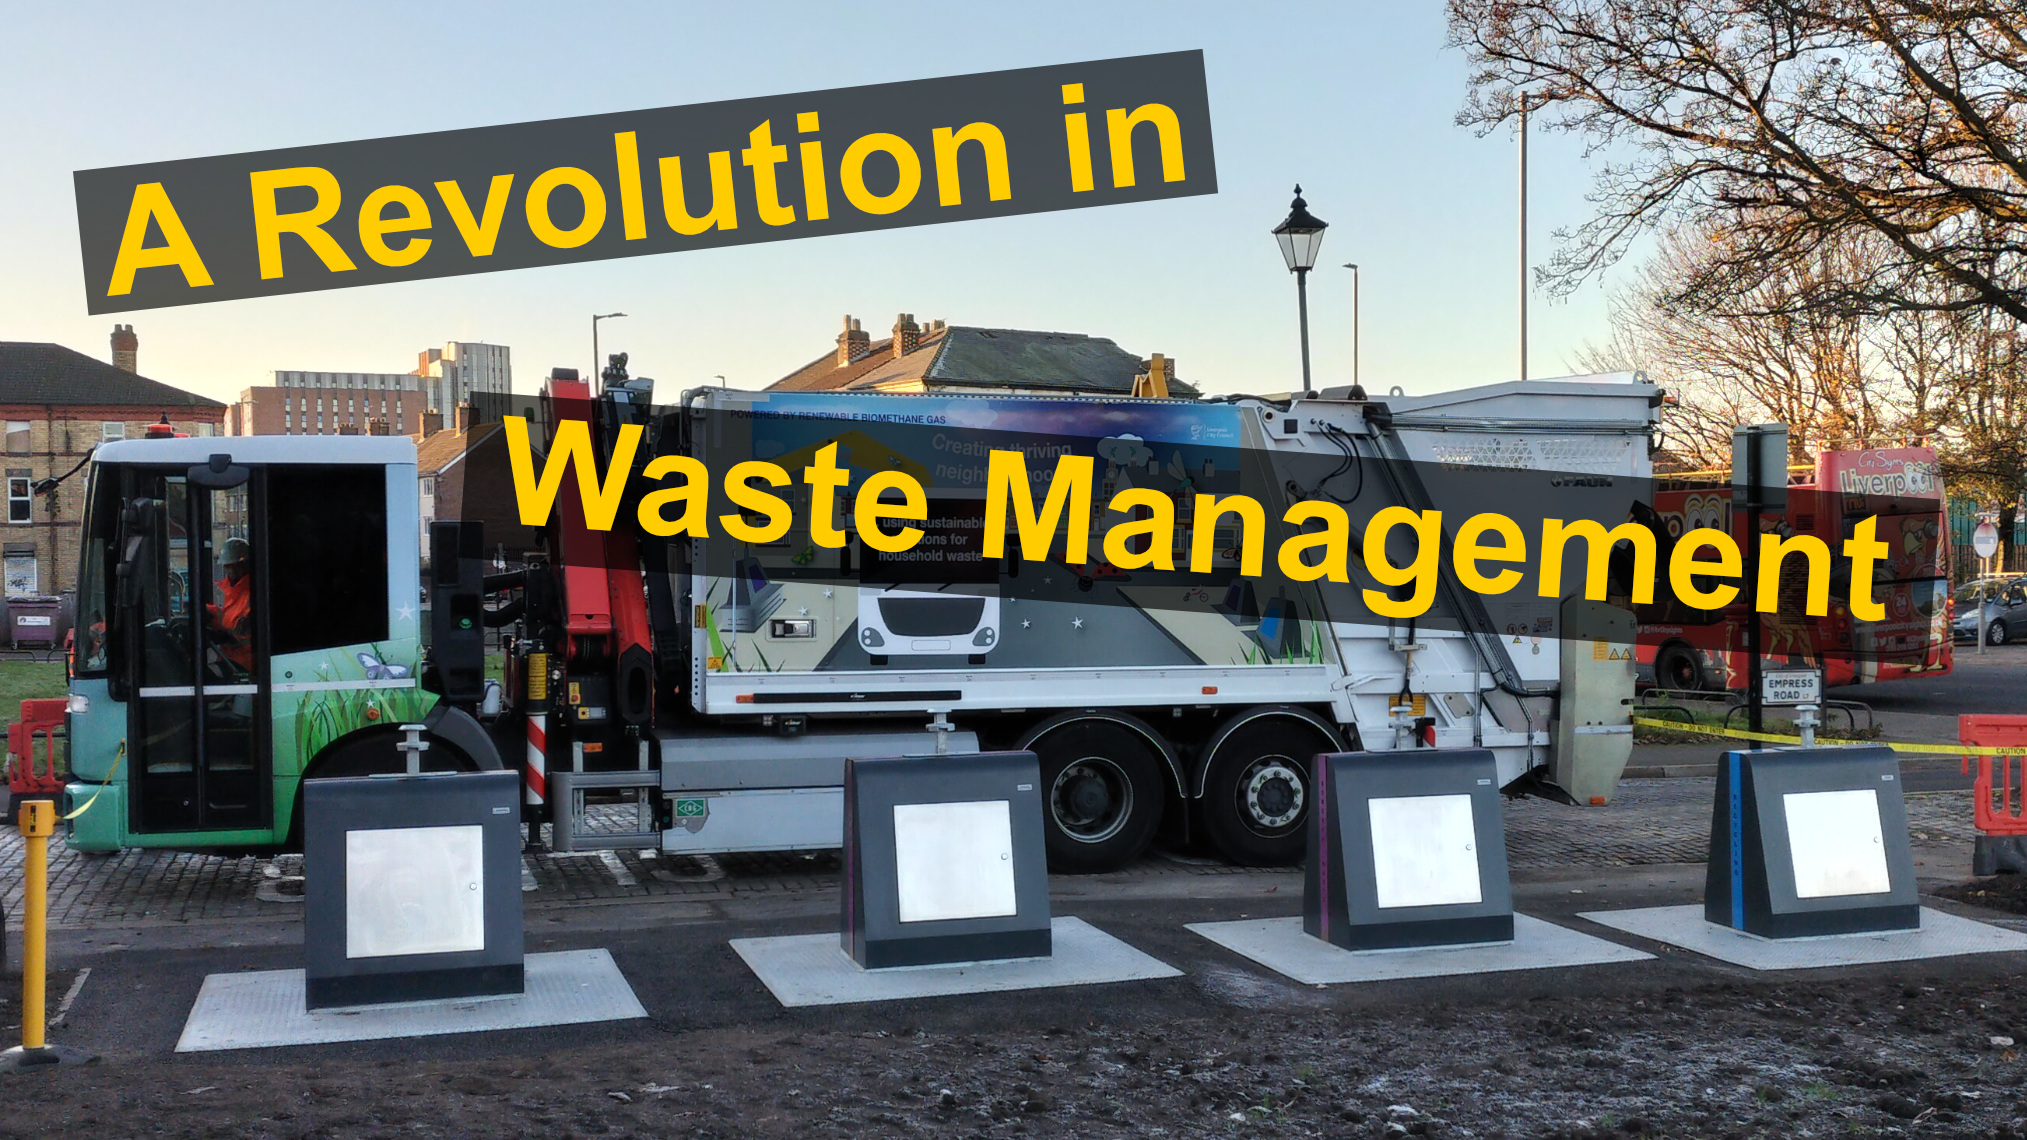 Underground Refuse Systems - the future of waste management